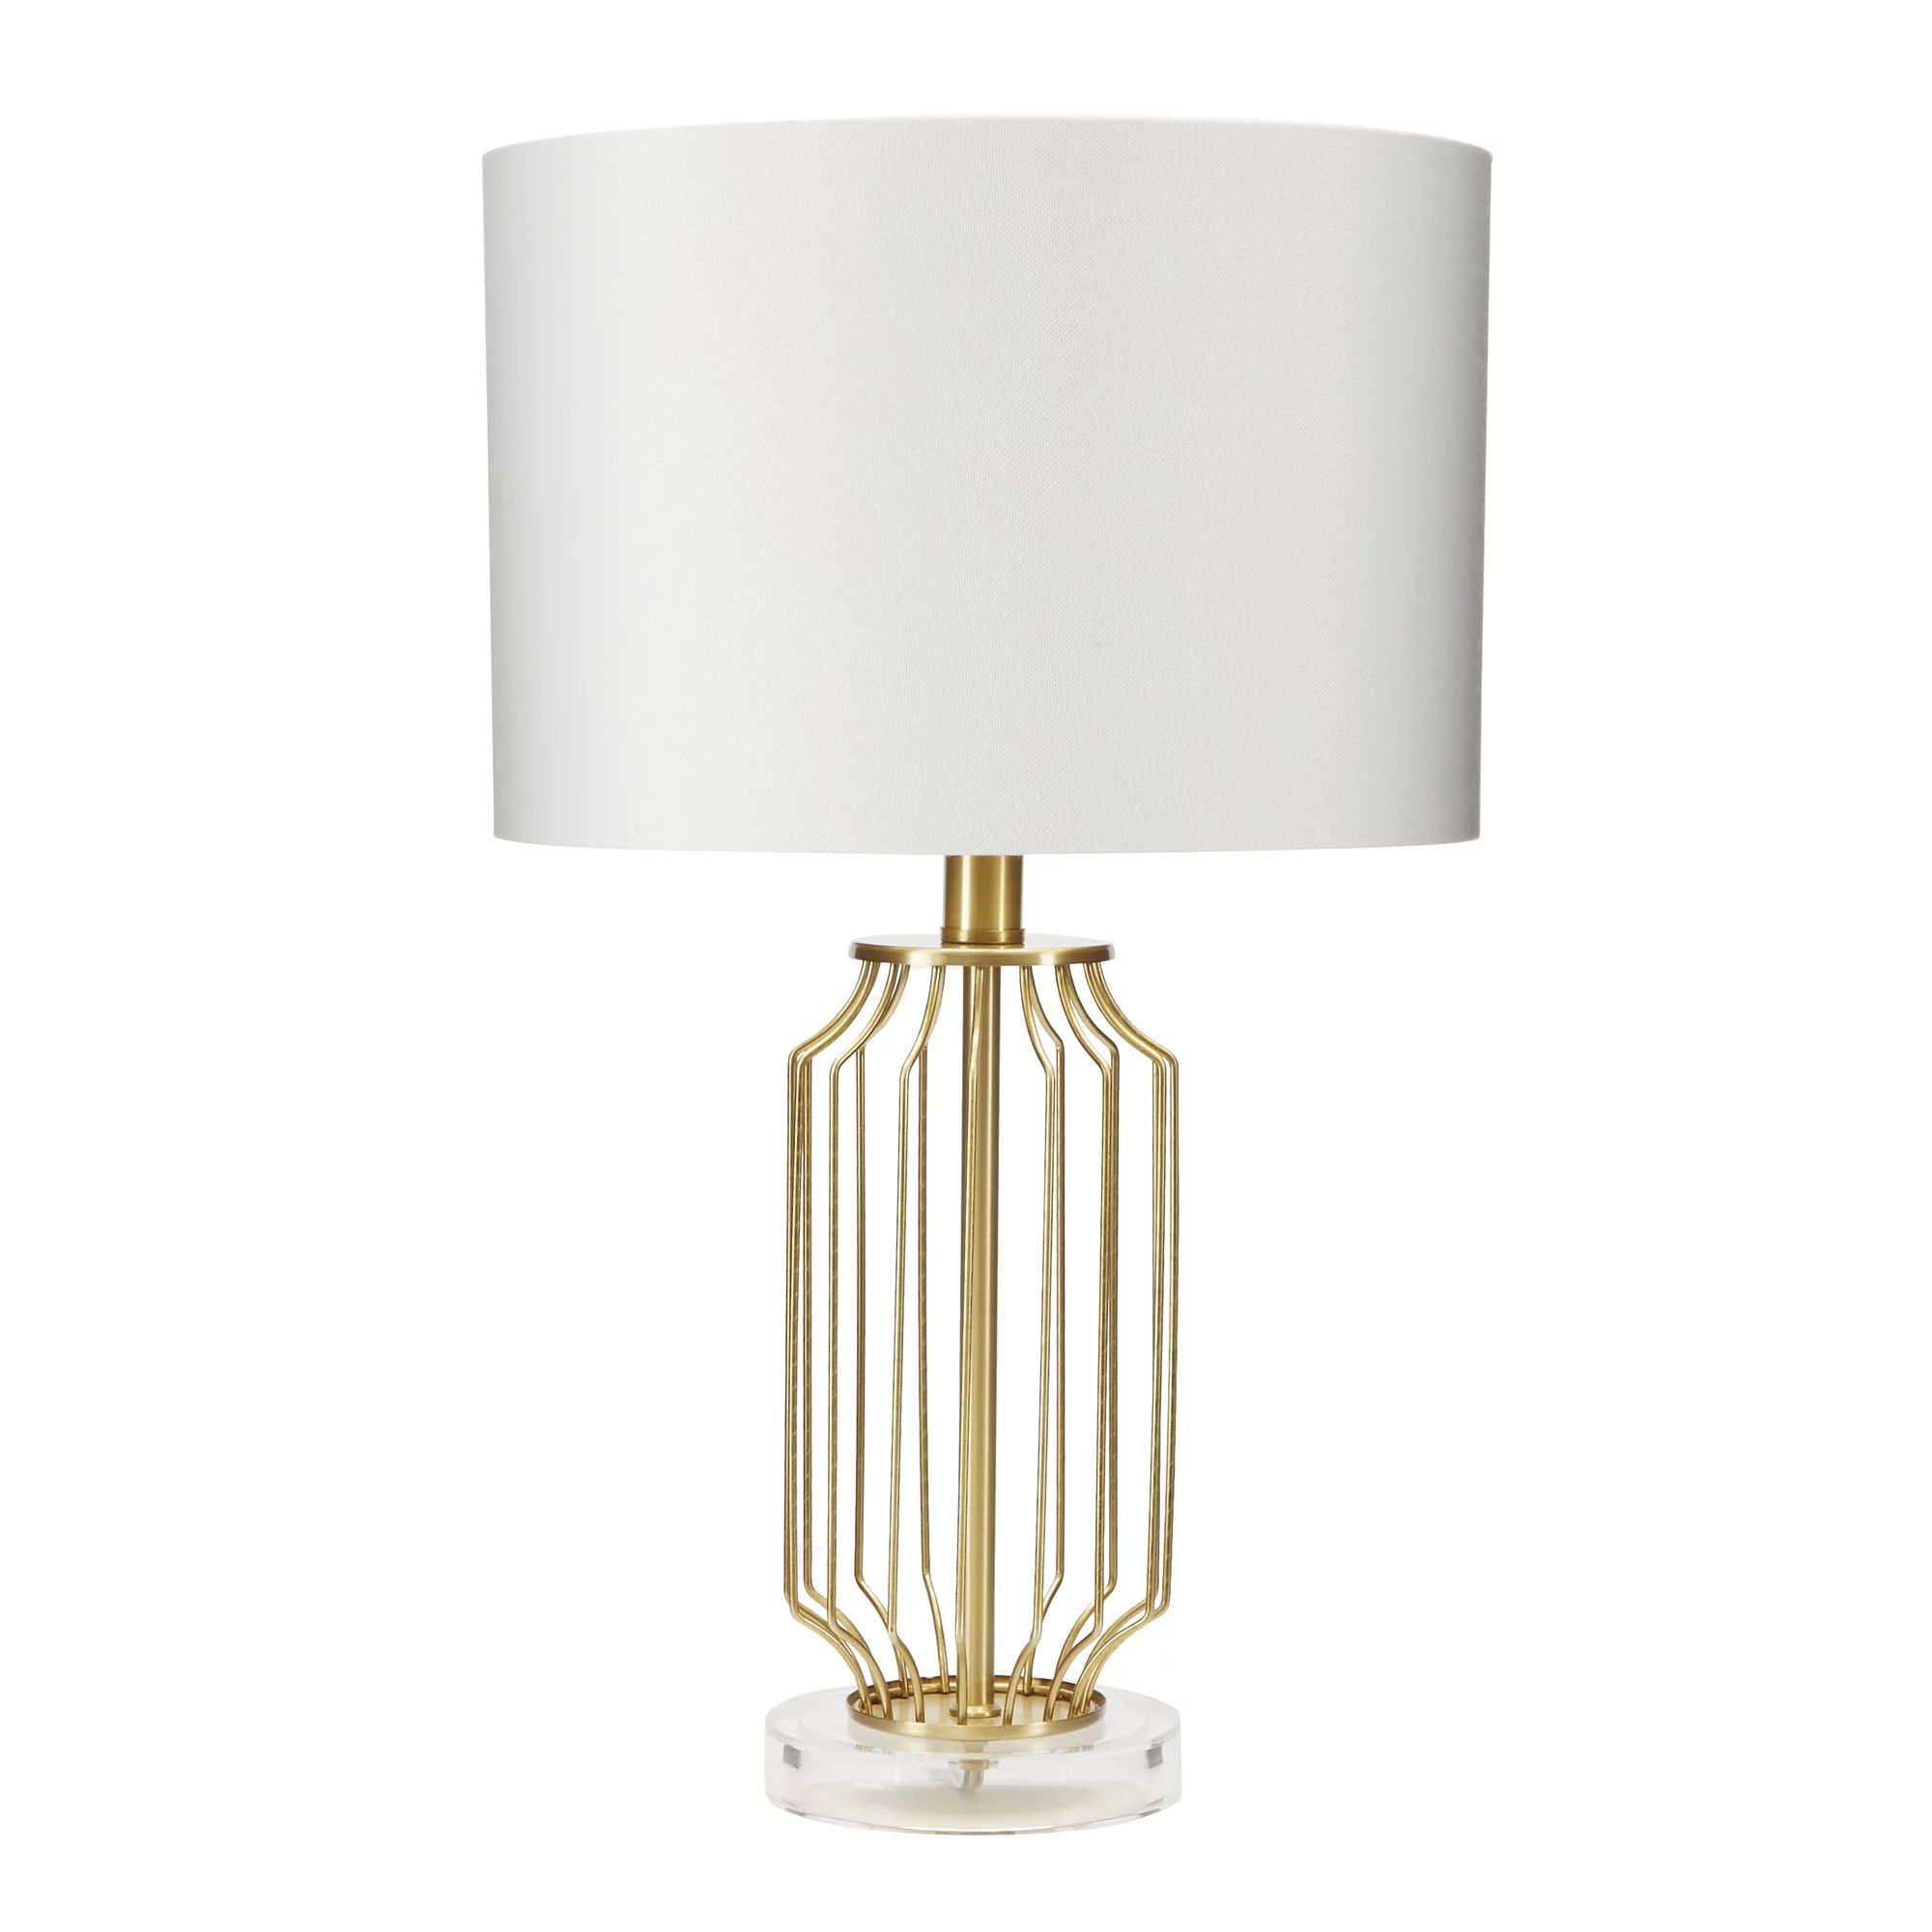 Better Homes & Gardens Metal Cage Table Lamp, Brushed Brass Finish, CFL Bulb Included | Walmart (US)